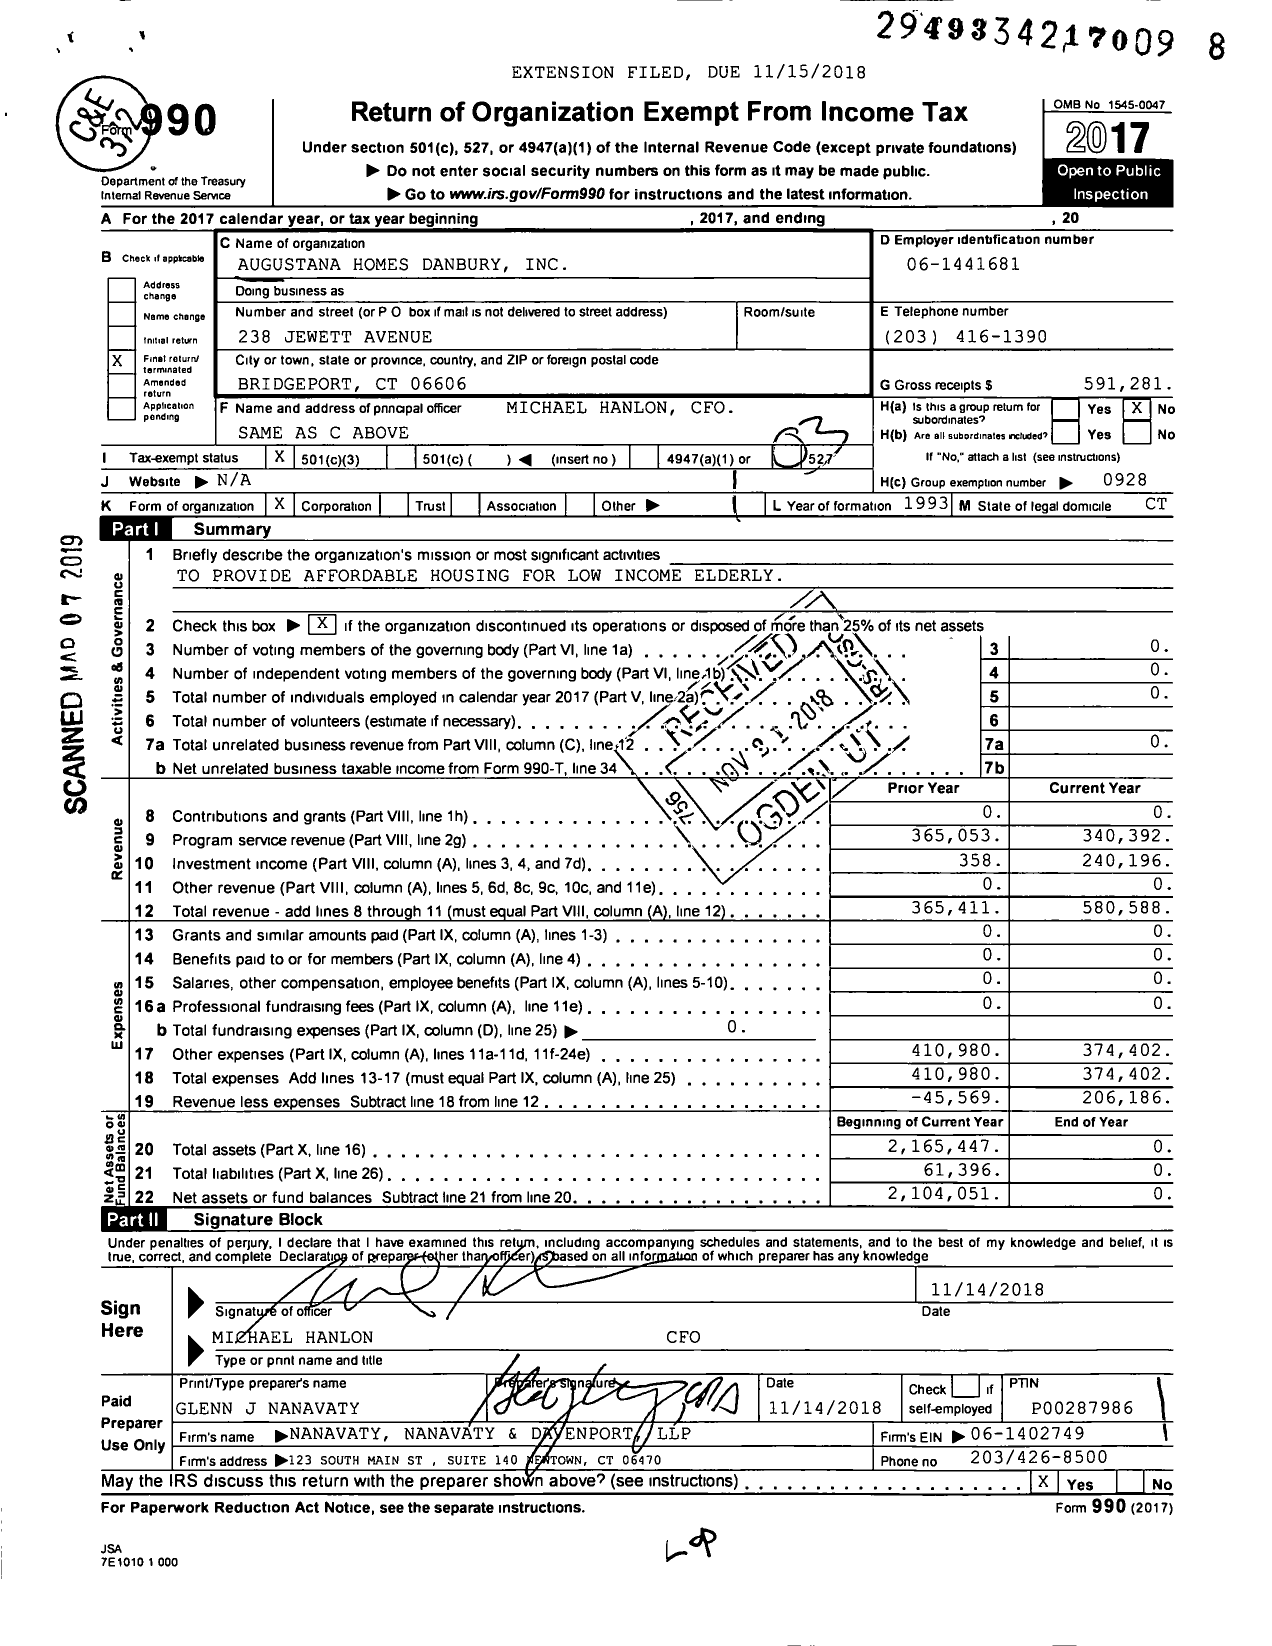 Image of first page of 2017 Form 990 for Augustana Homes Danbury